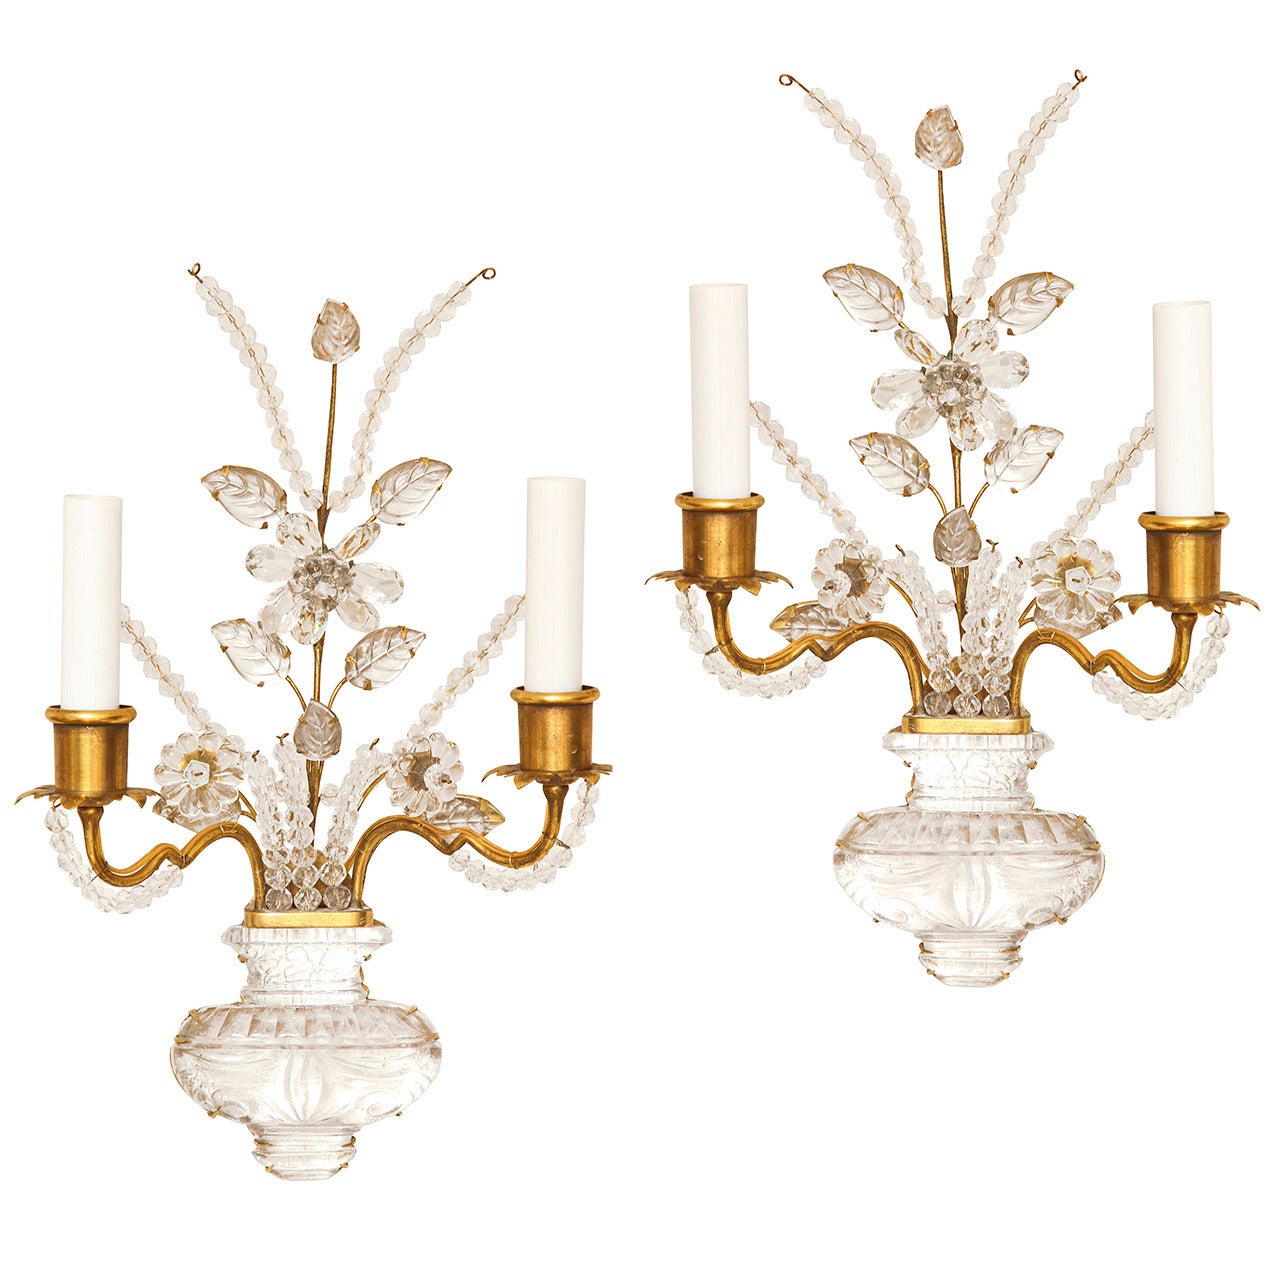 Pair of Two-Light Bagues Style Bronze Wall Lights